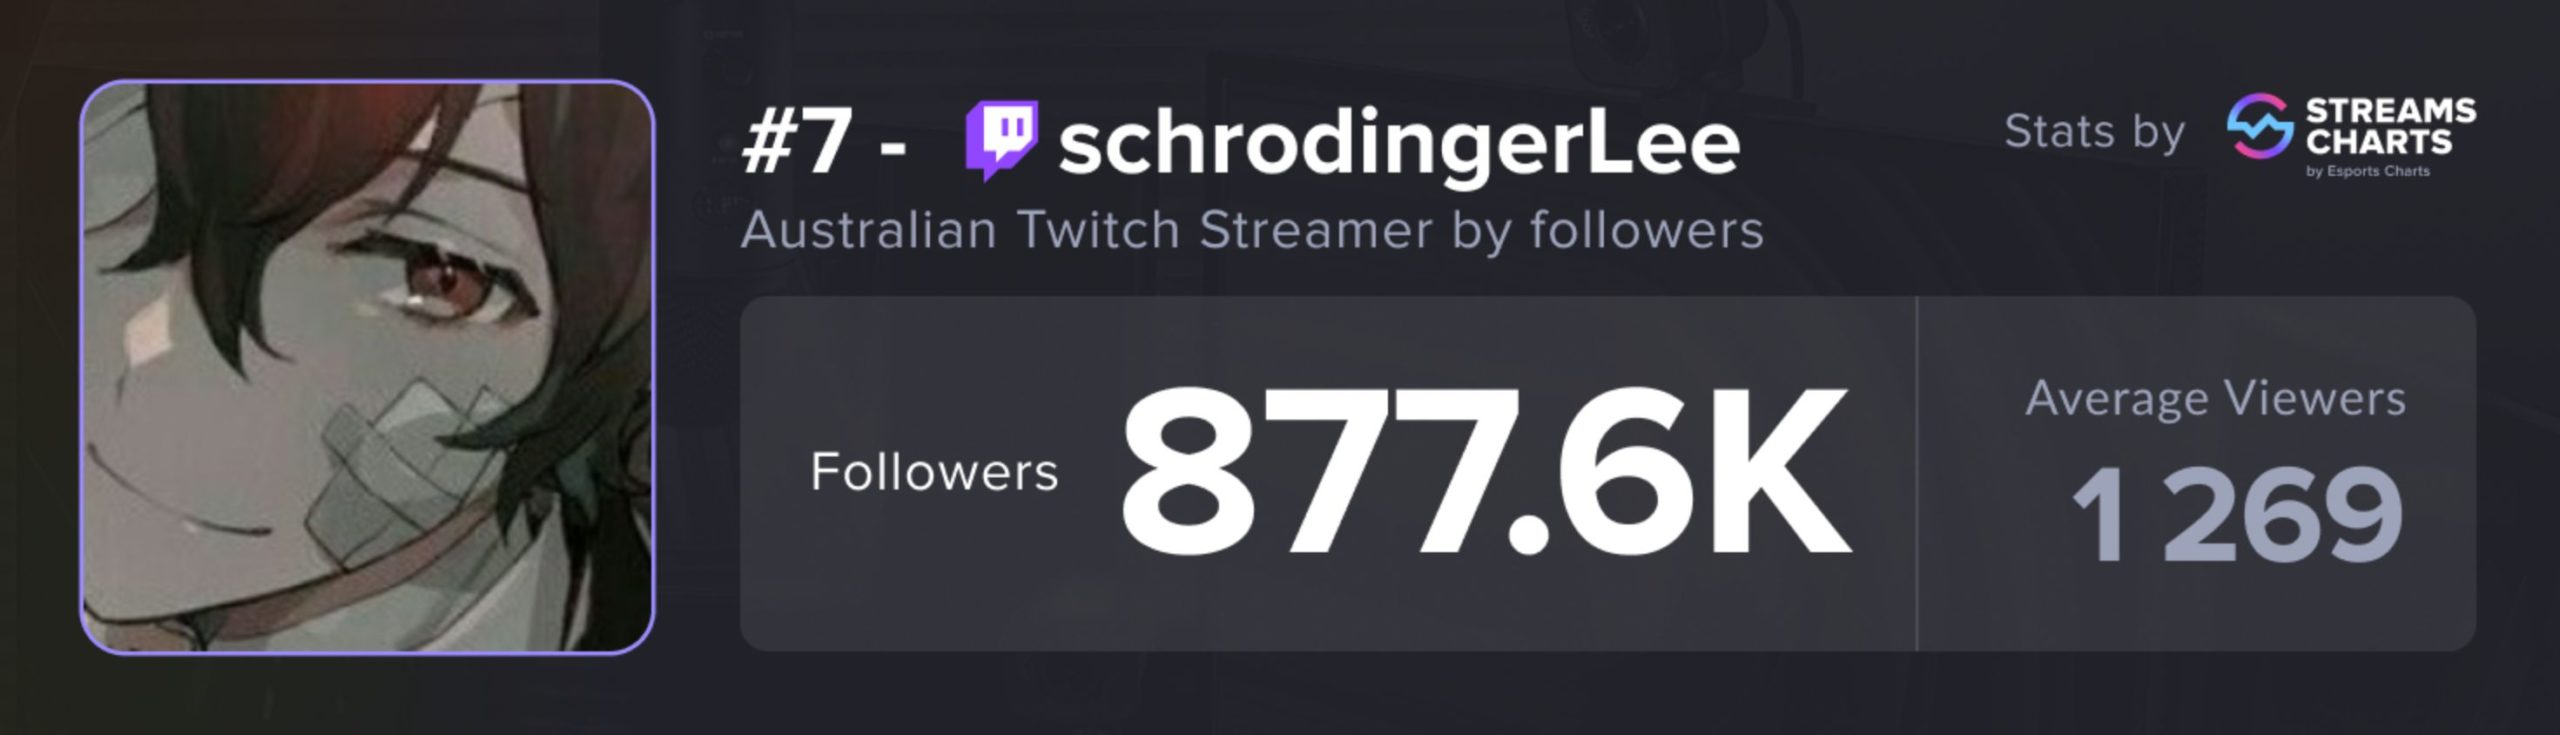 SchrodingerLee - Twitch Ratings